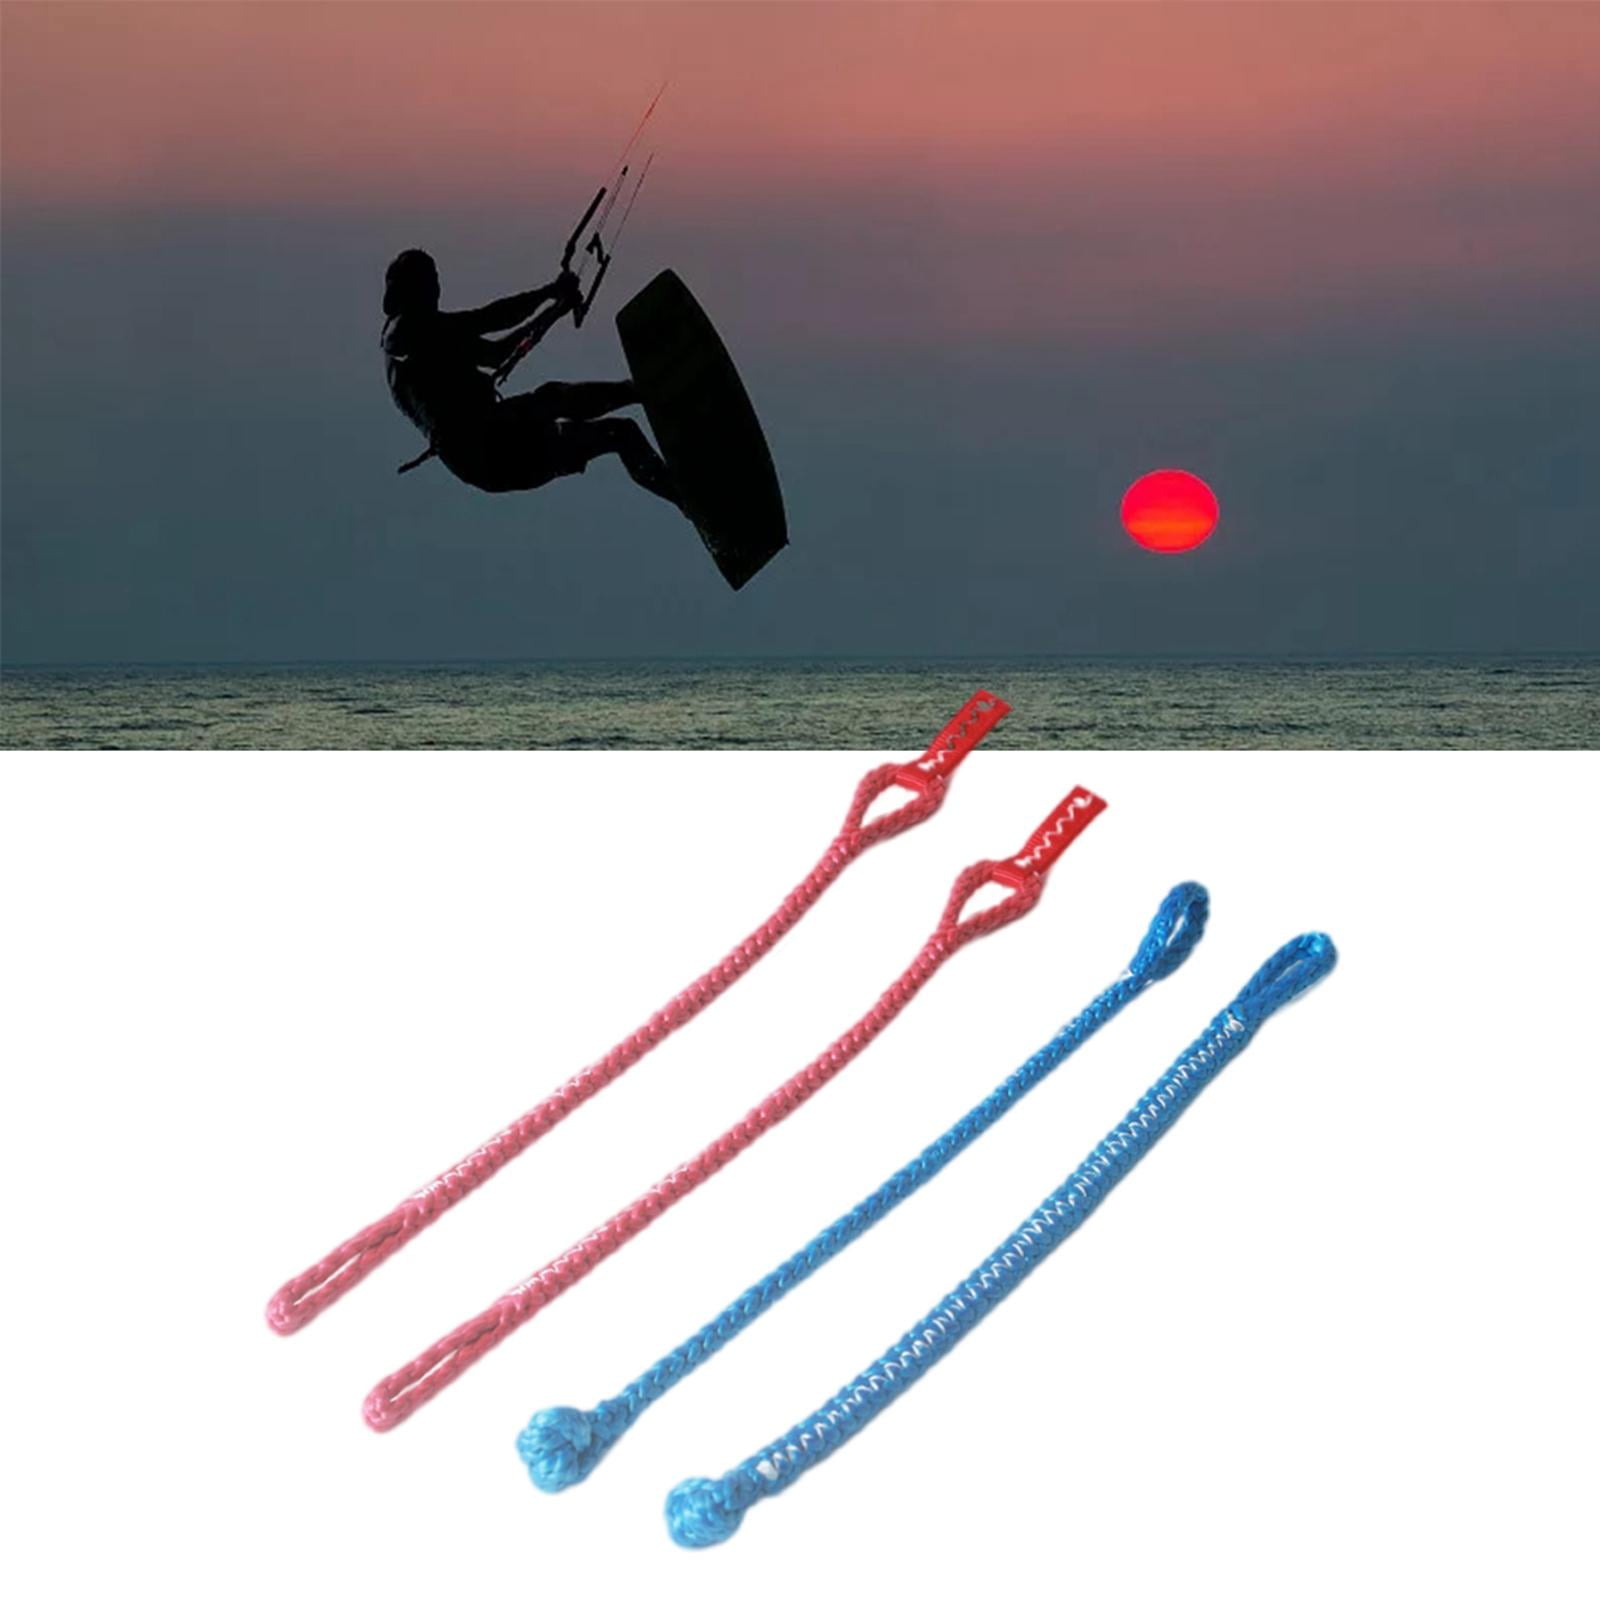 Colcolo 4 Pieces Kitesurfing Pigtails 1000kg Kite Kitesurfing Control Bar Replacement Pigtails Boarding Kite Accessories for Women Men Watersports